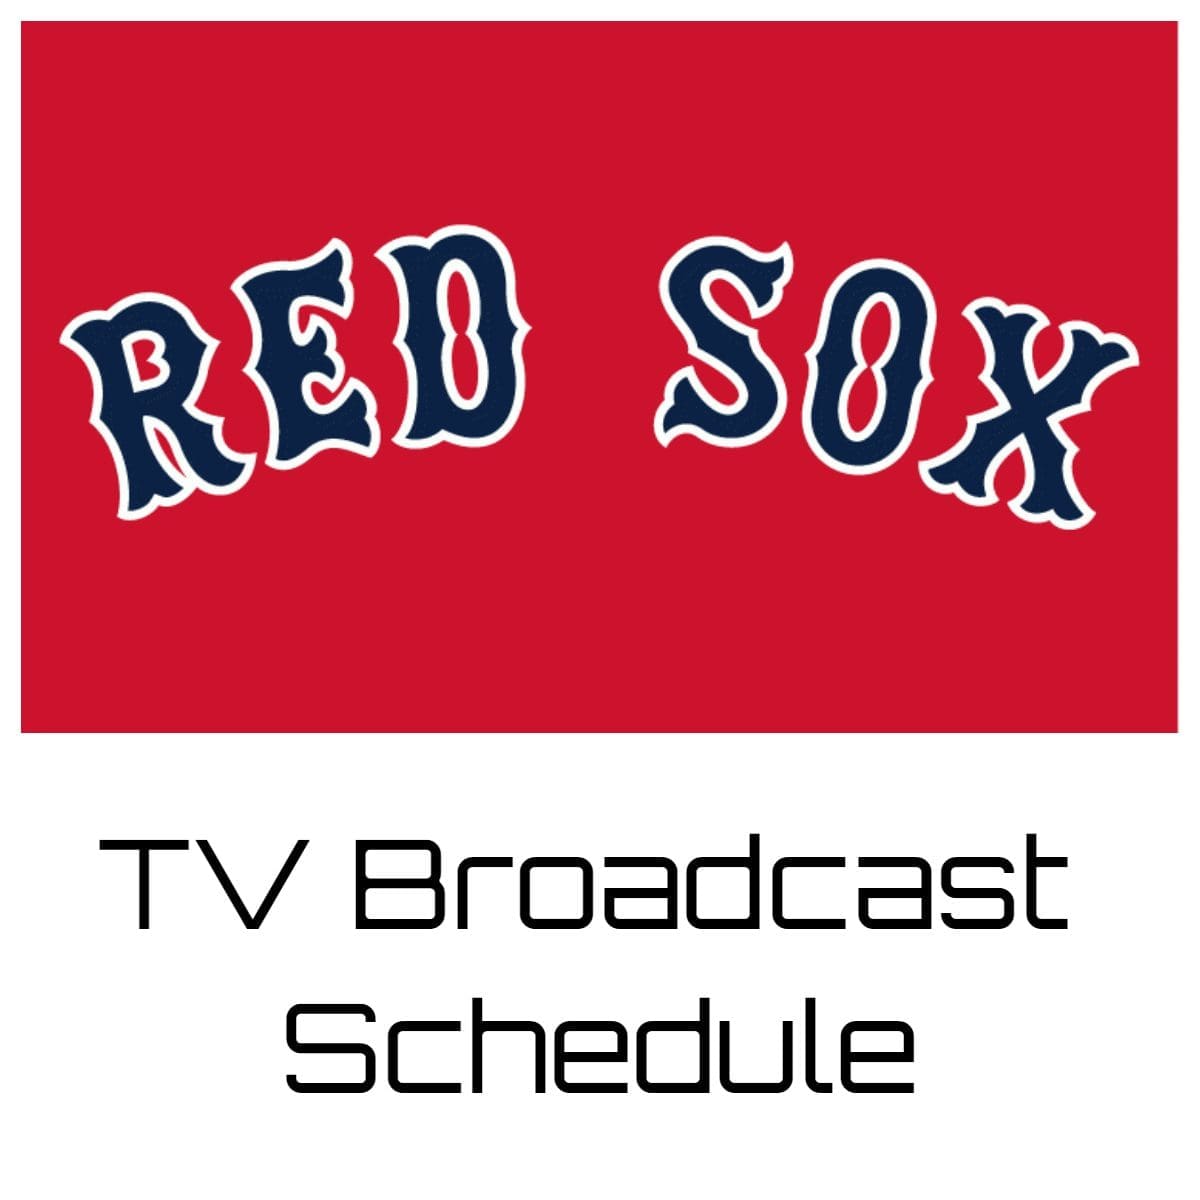 Boston Red Sox TV Broadcast Schedule